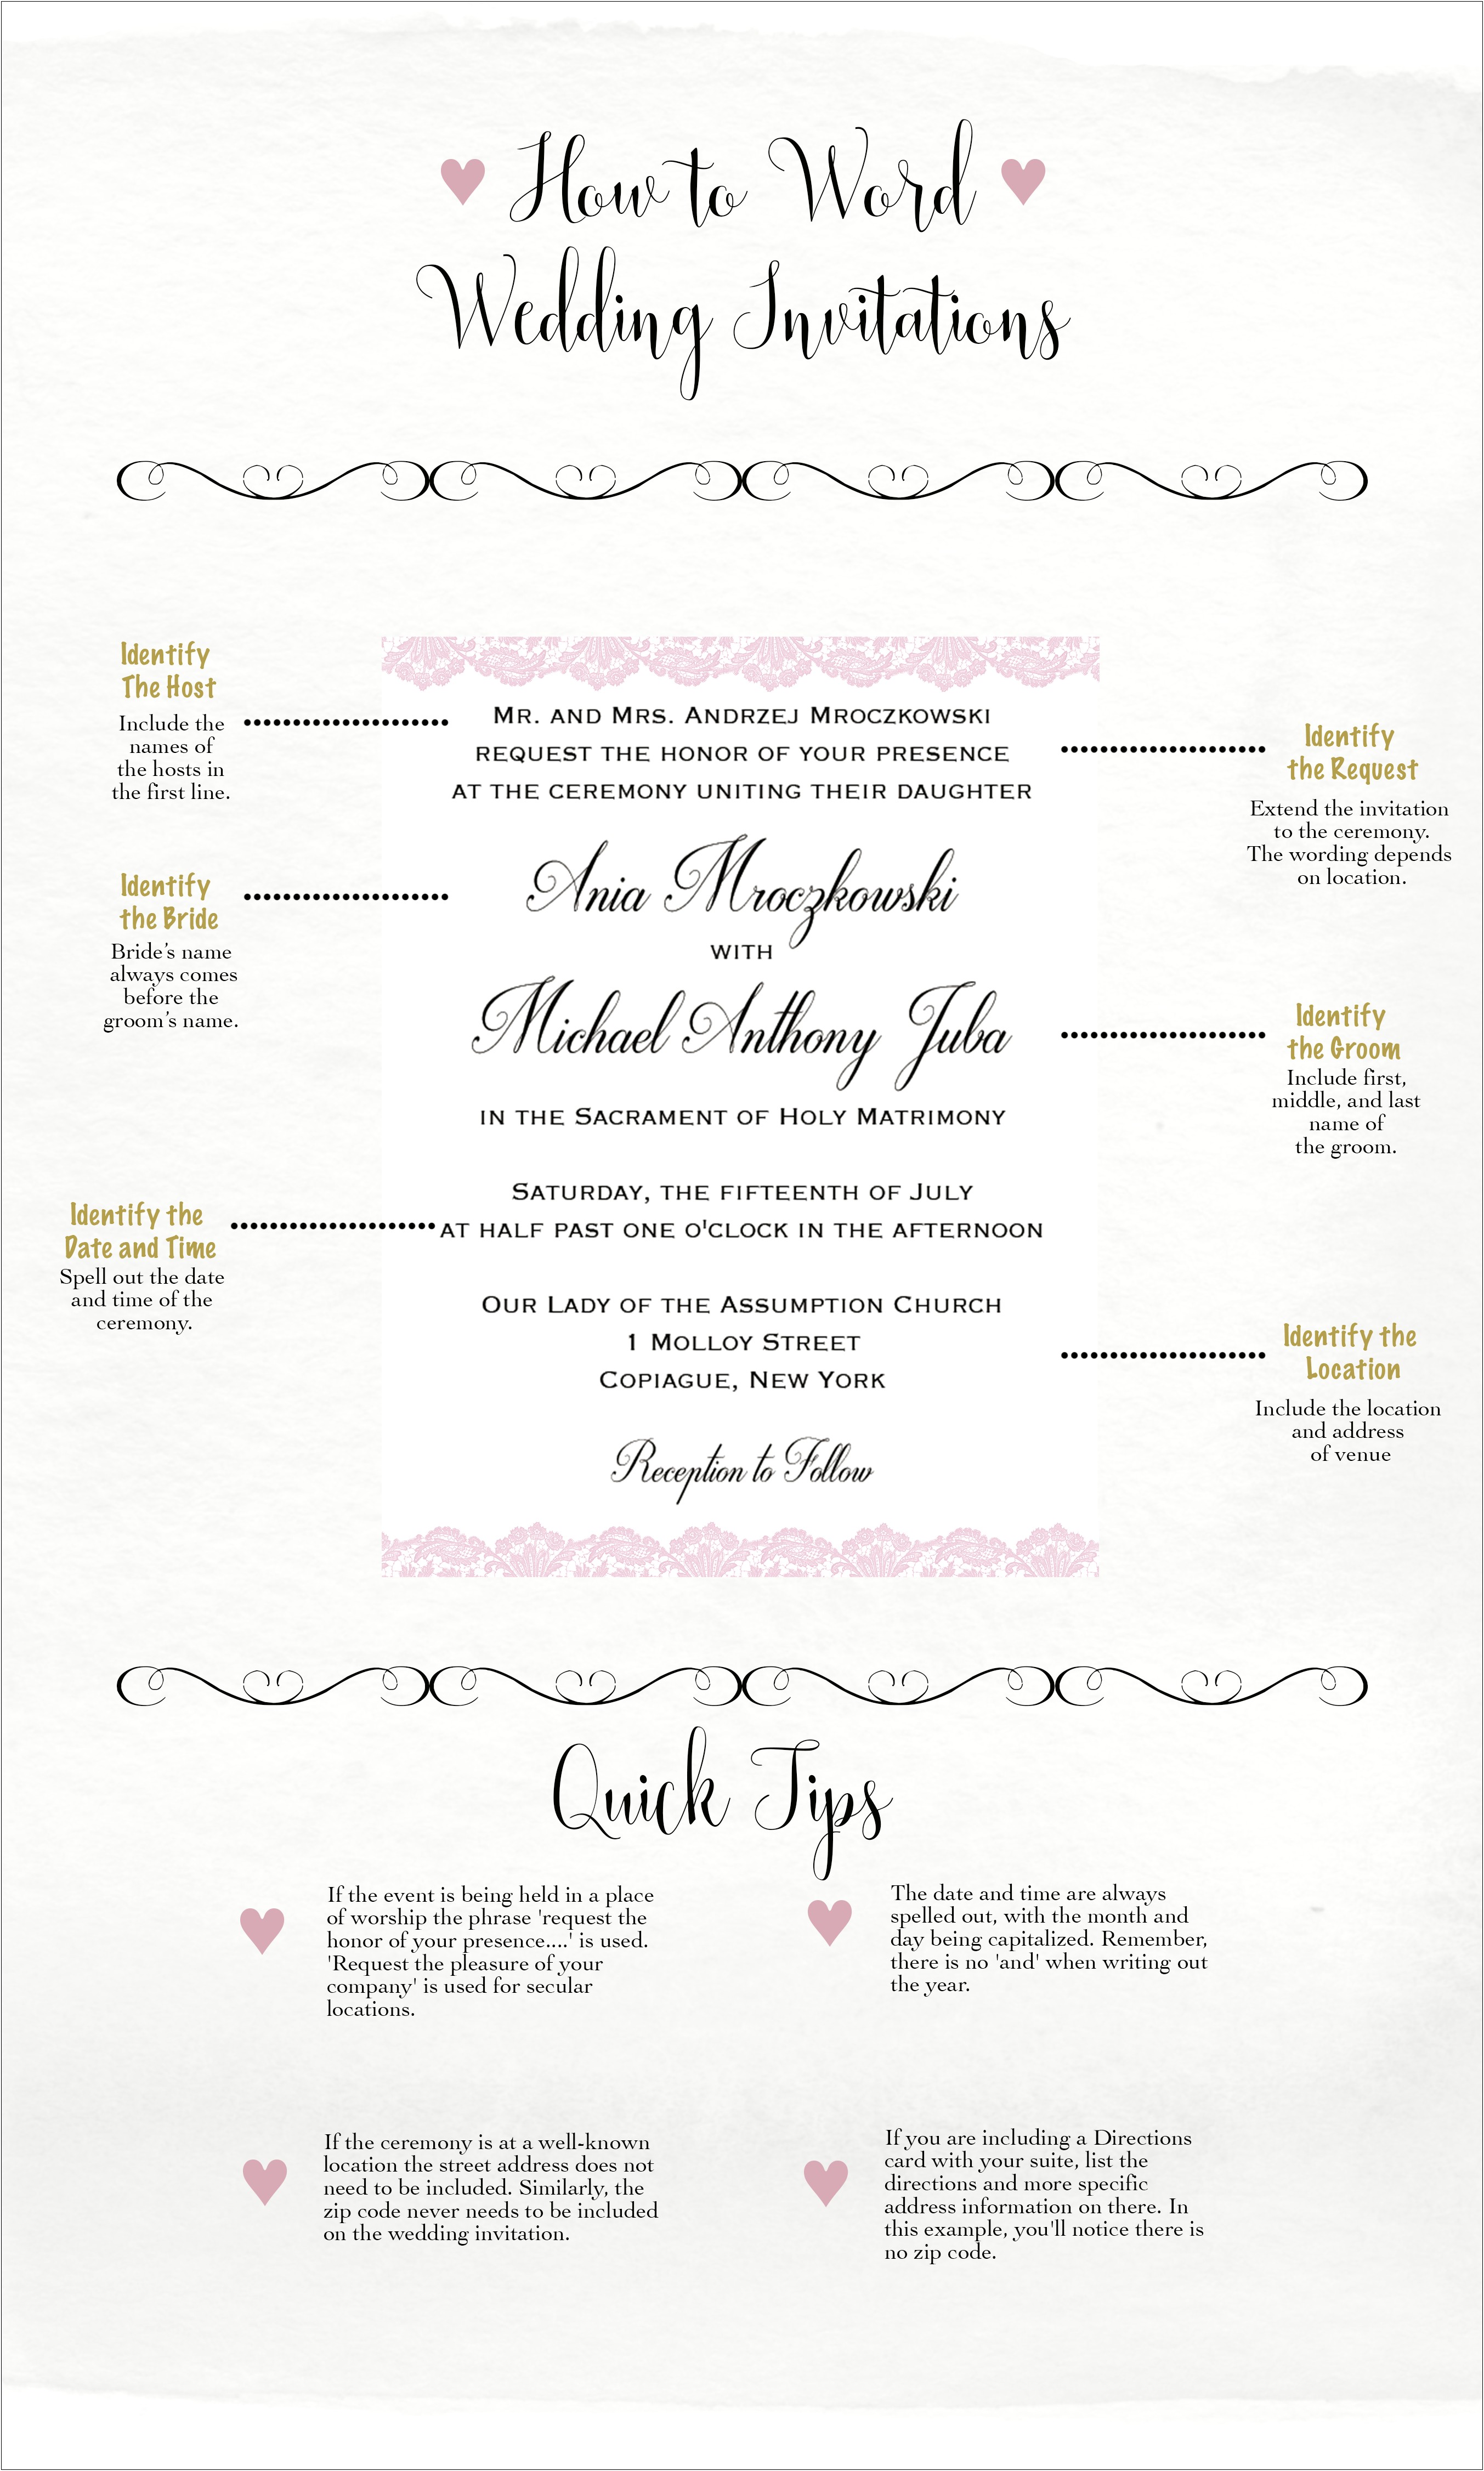 Wedding Invitations Who Name Goes First